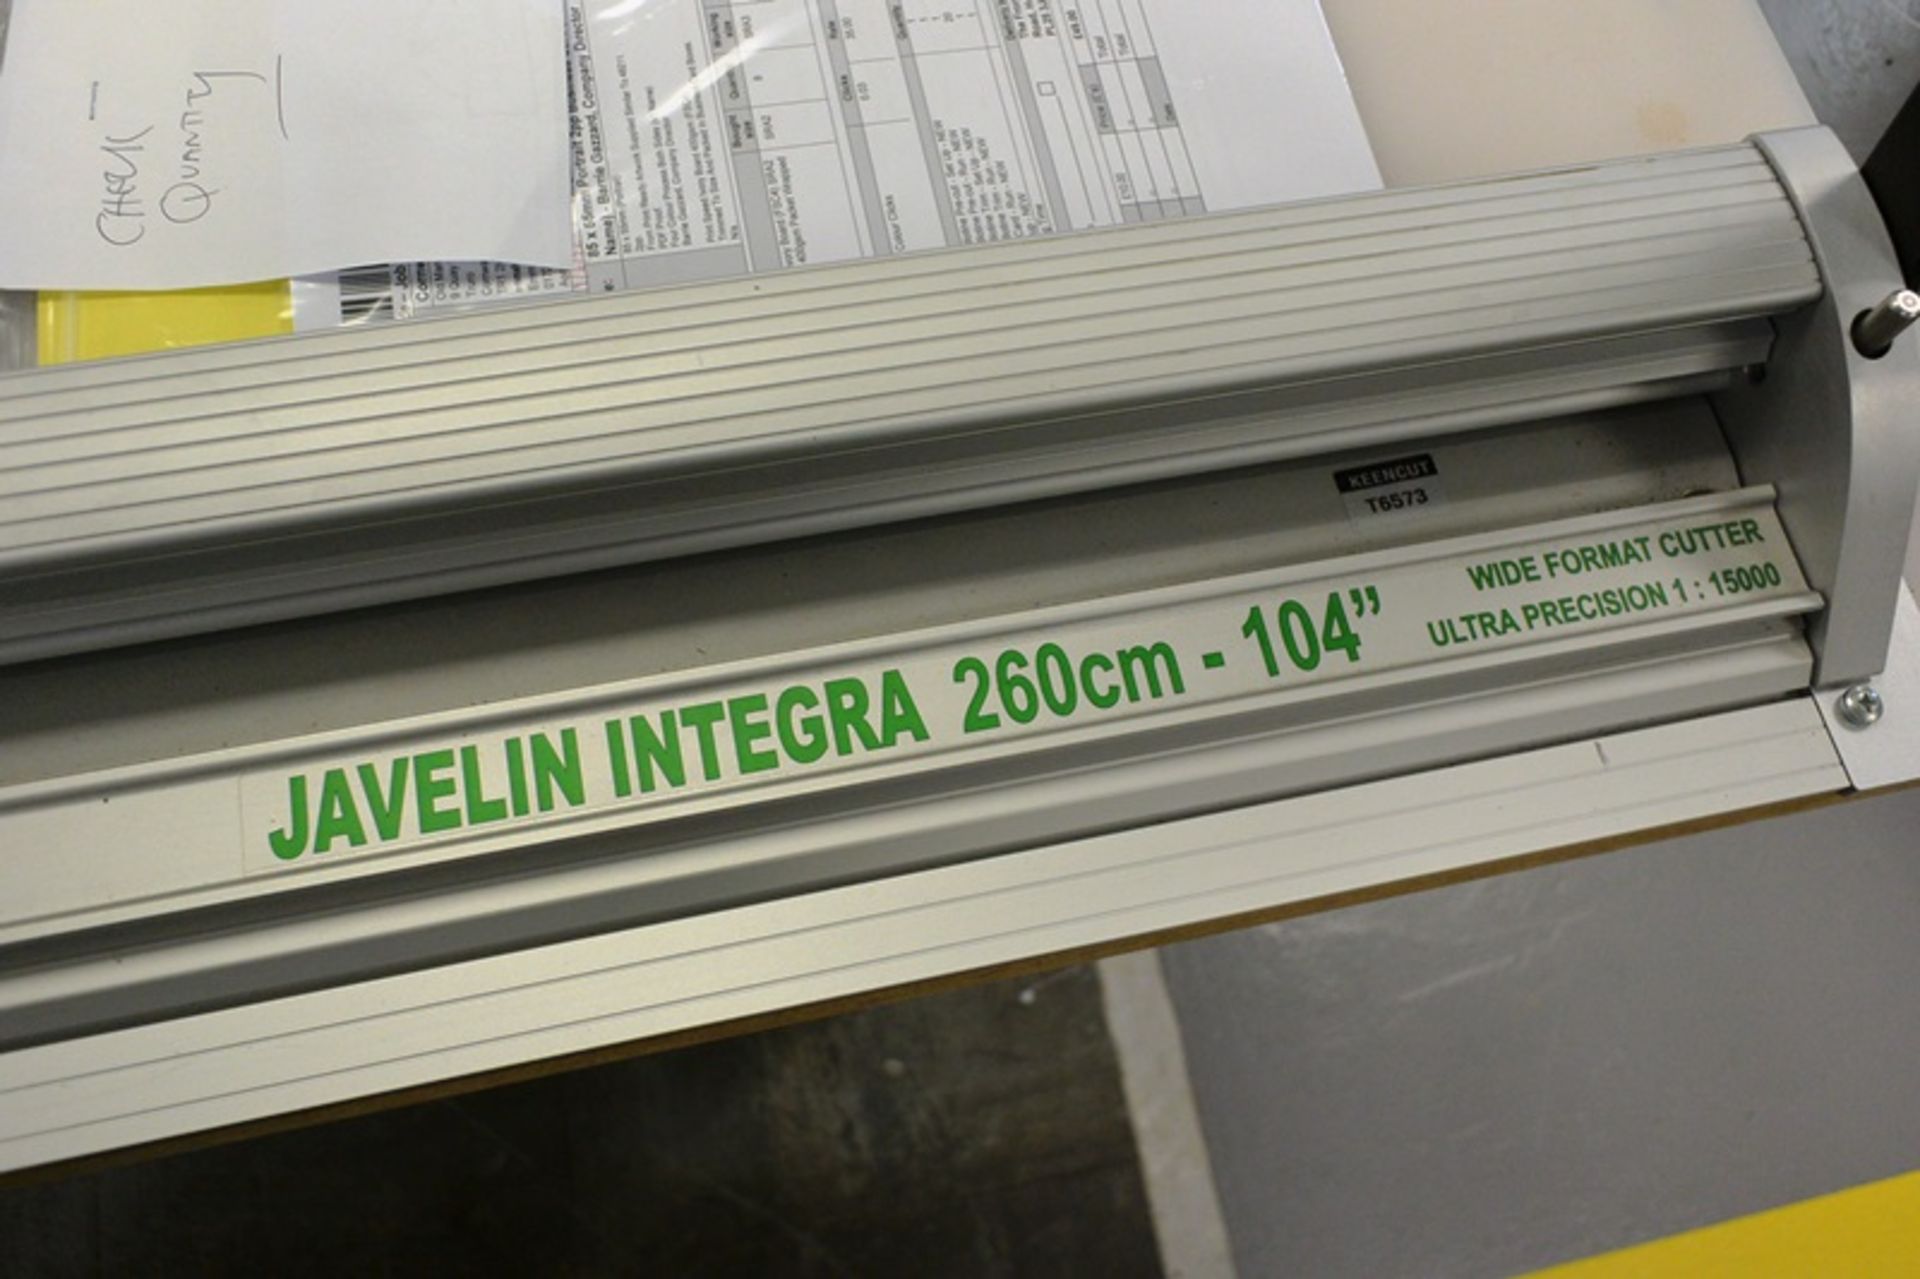 Keen Cut Javelin Integra 260cm hand operated wide format paper guillotine, Ultra Precision 1 : - Image 2 of 2